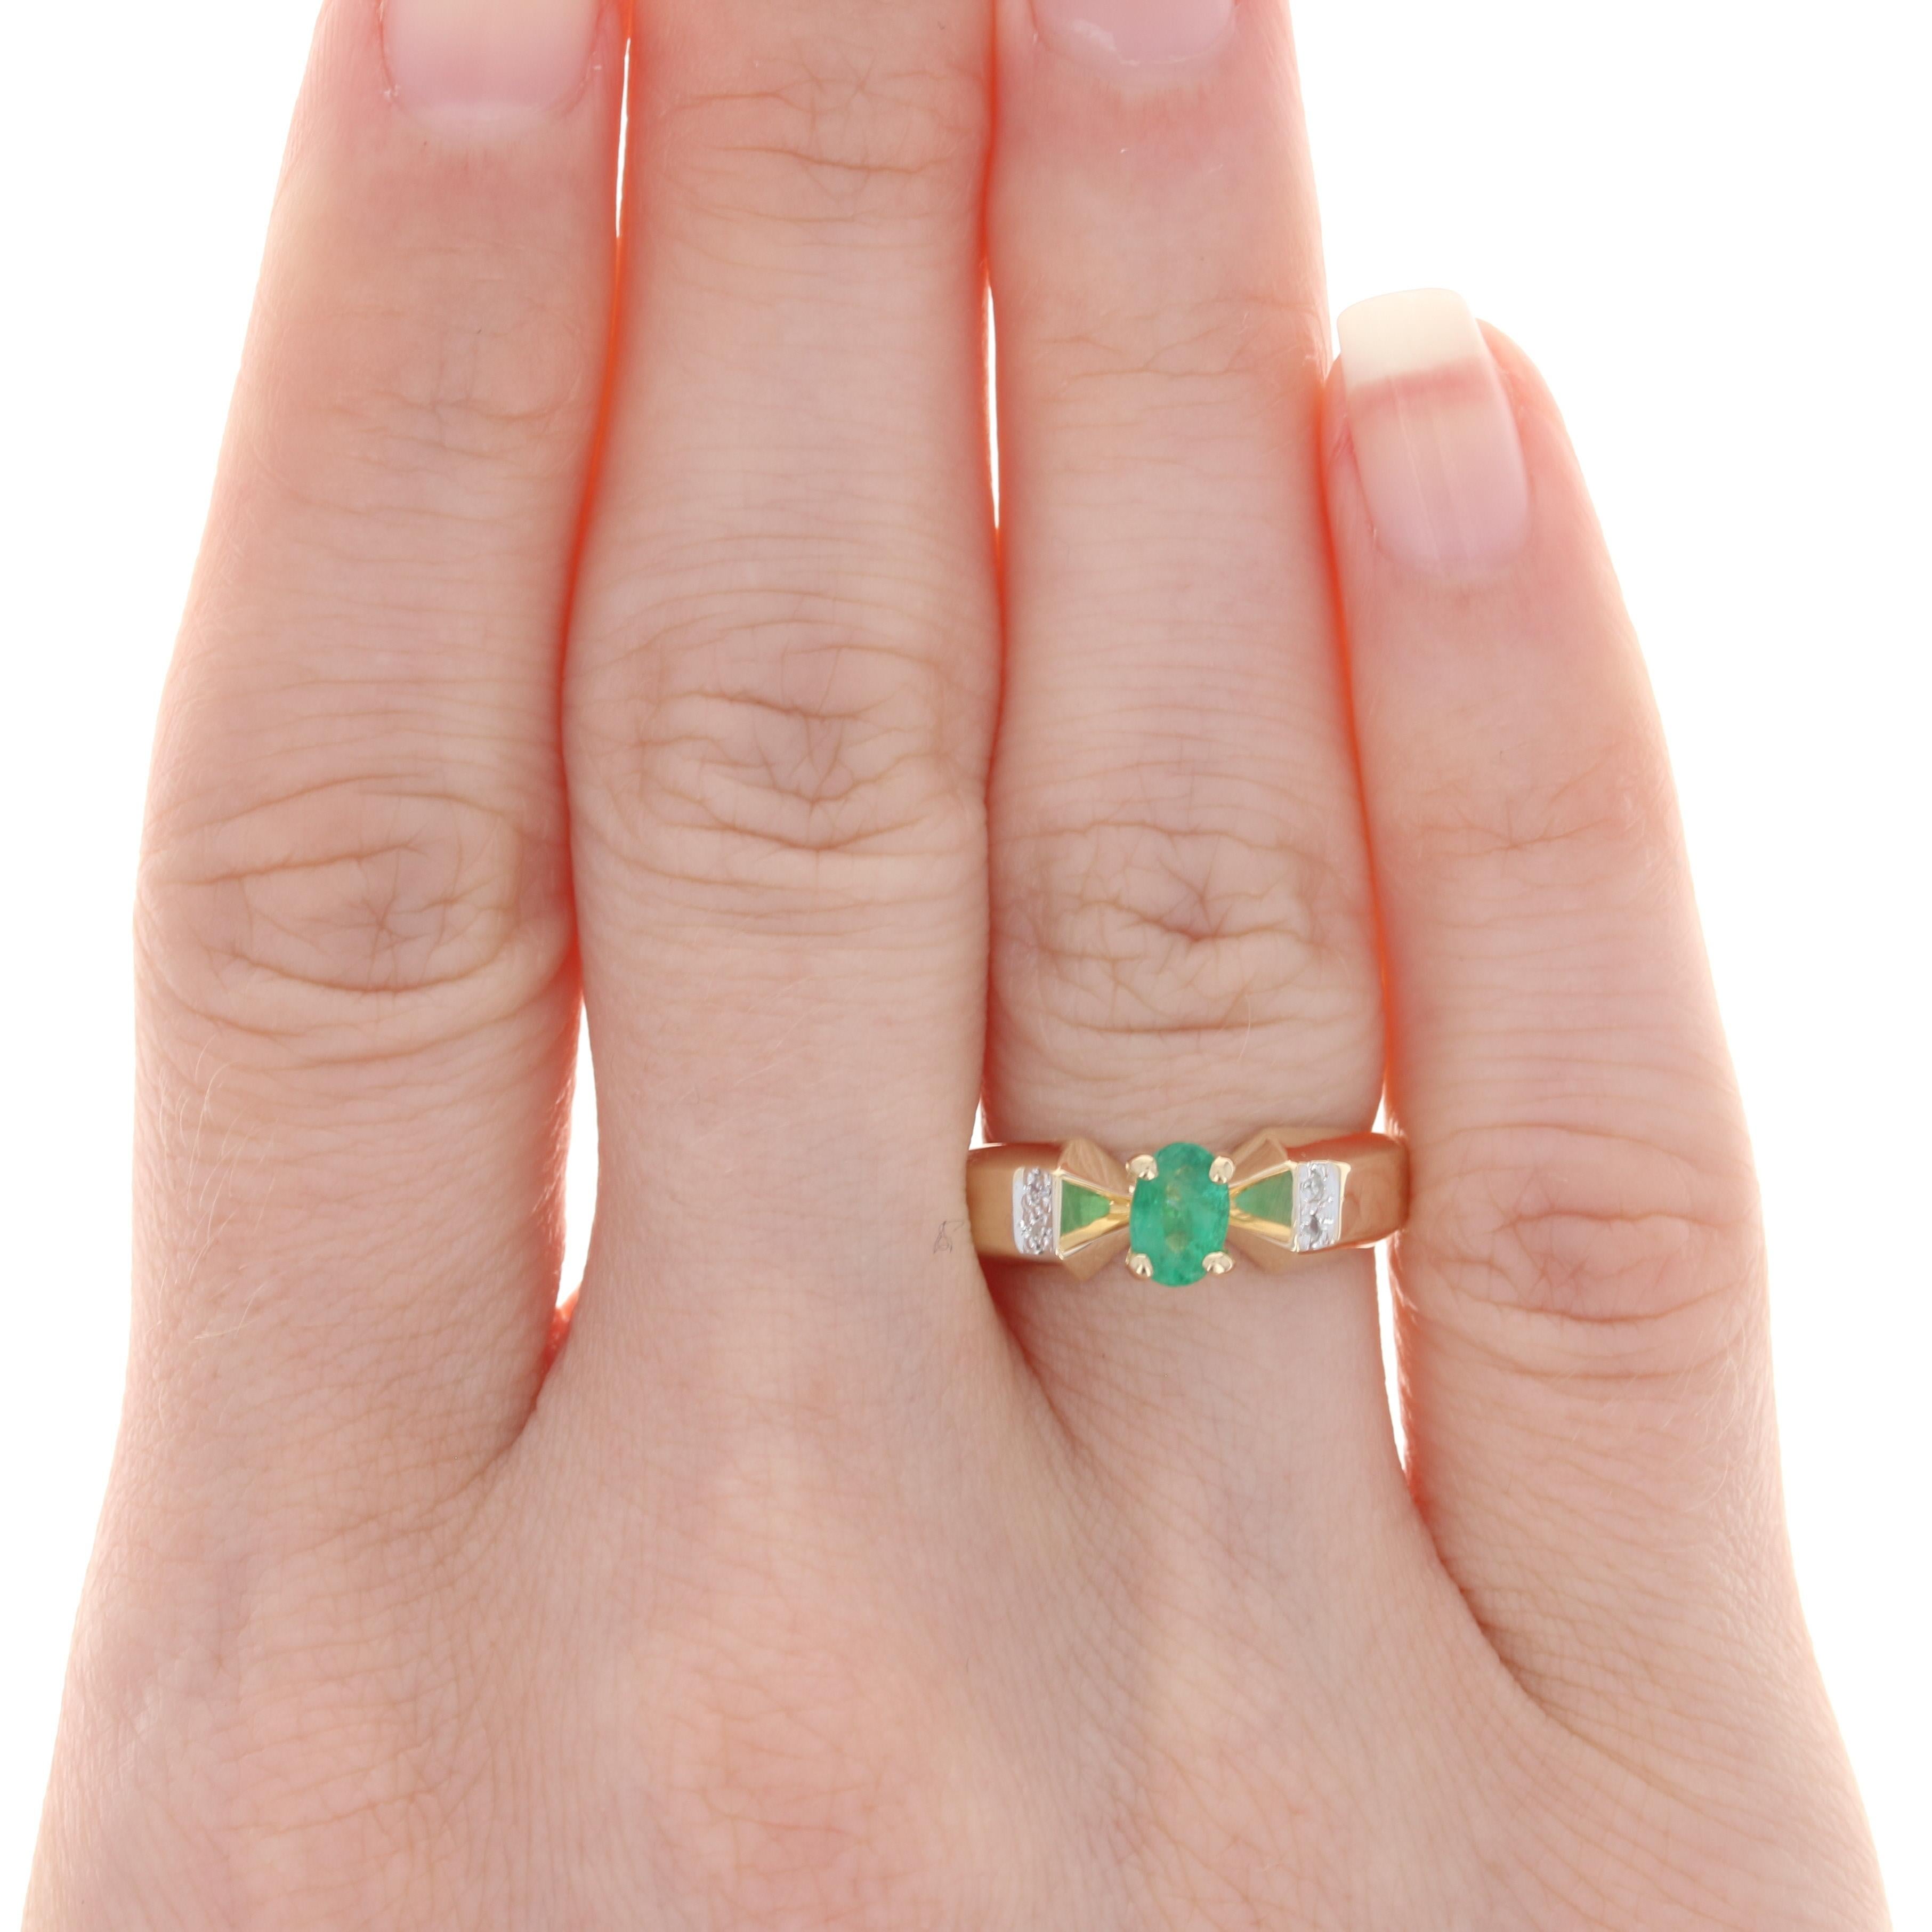 Size: 6
Sizing Fee: Down 2 sizes for a $20 fee or up 2 sizes for a $25 fee

Metal Content: 14k Yellow Gold & 14k White Gold

Stone Information: 
Genuine Emerald
Treatment: Oiling
Carat: .50ct
Cut: Oval
Color: Green
Size: 5.9mm x 4mm

Natural